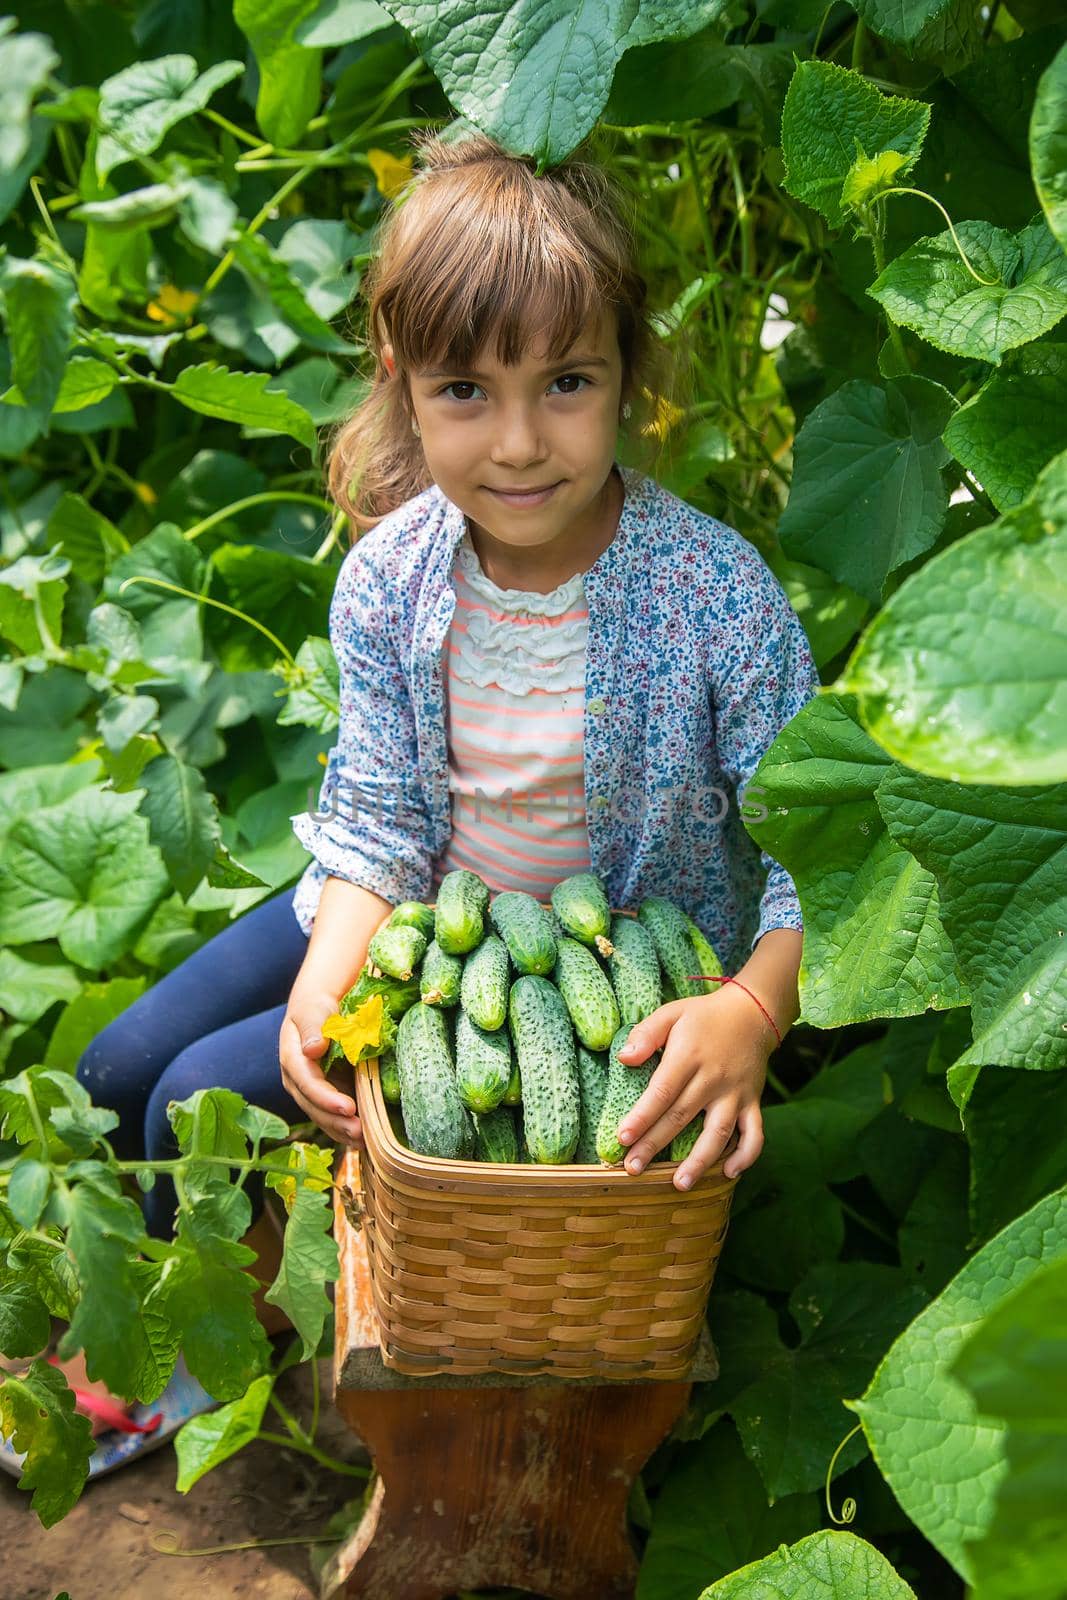 The child is harvesting cucumbers. Selective focus. Food.